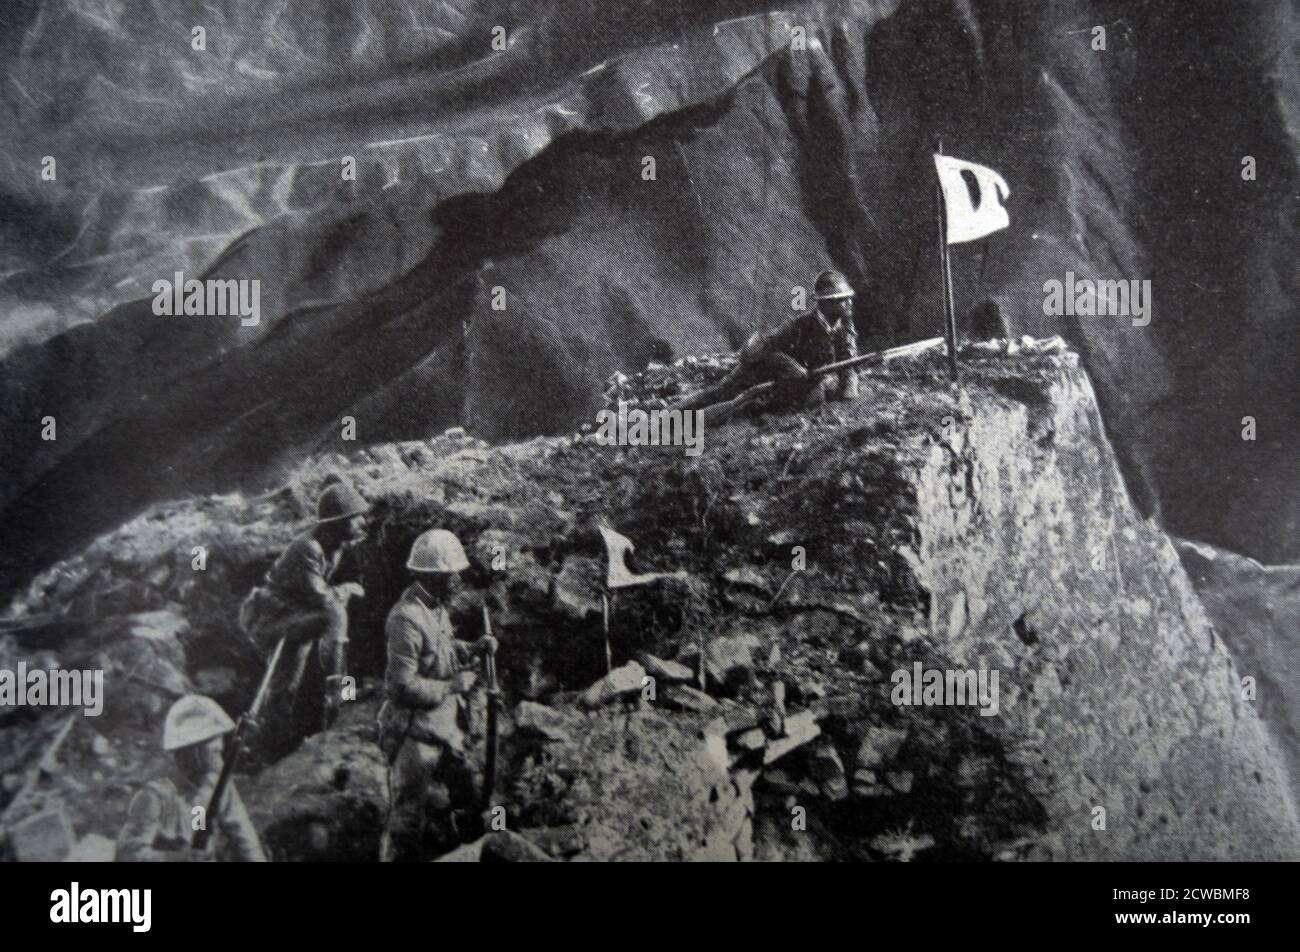 Black and white photograph of the Second Sino-Japanese War (1937-1945); Japanese soldiers in a mountainous region during the war. Stock Photo